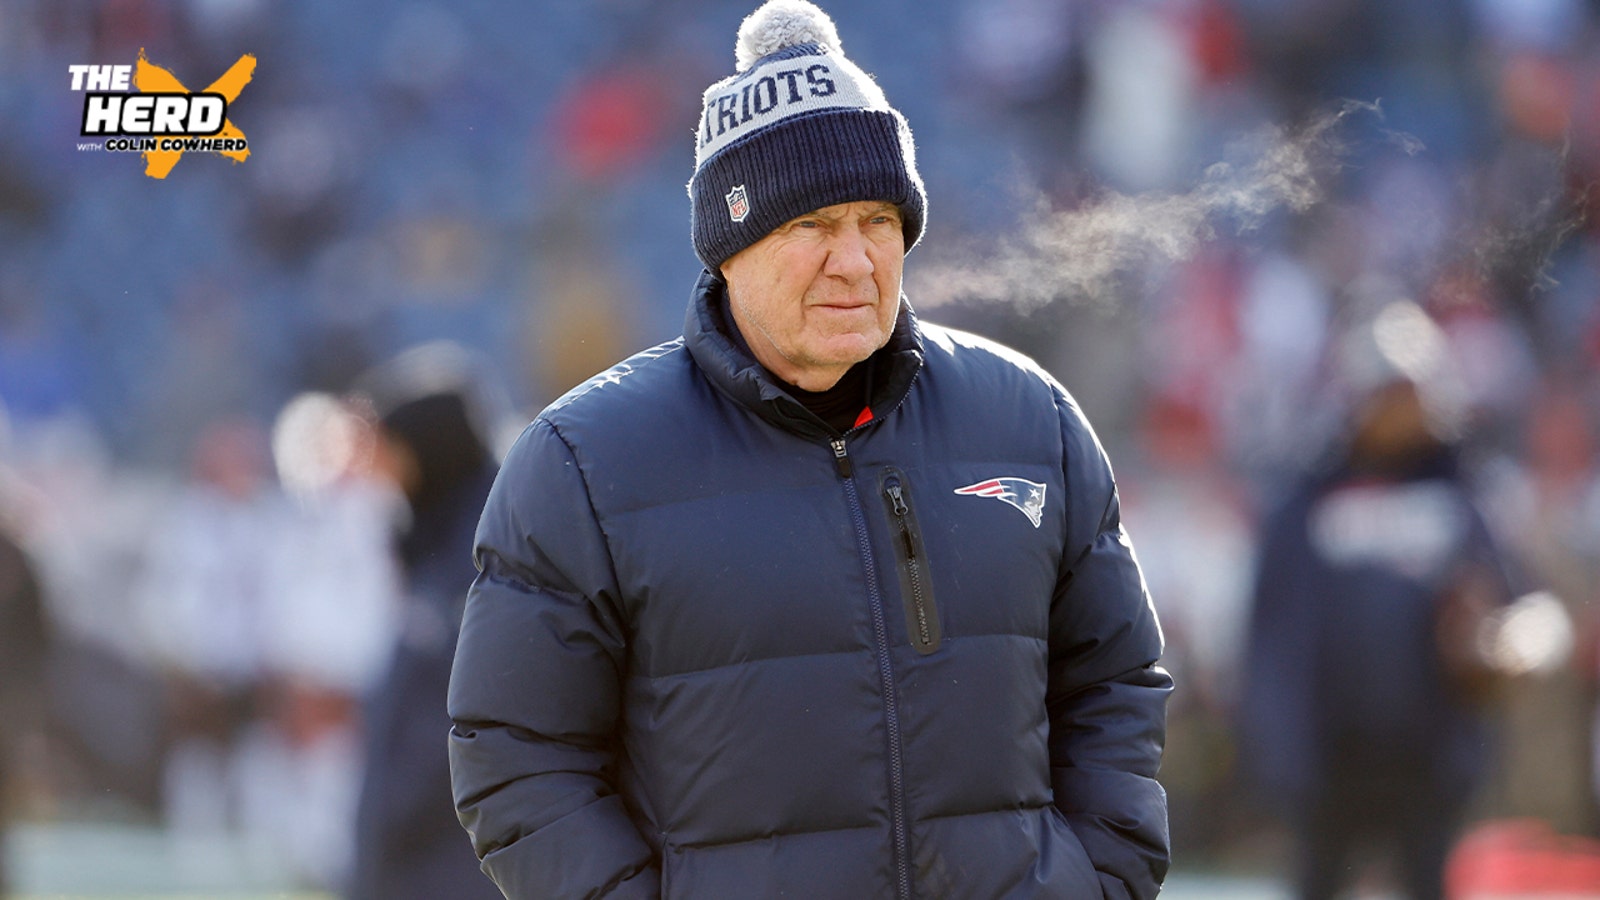 Have the Patriots become a dysfunctional organization? 